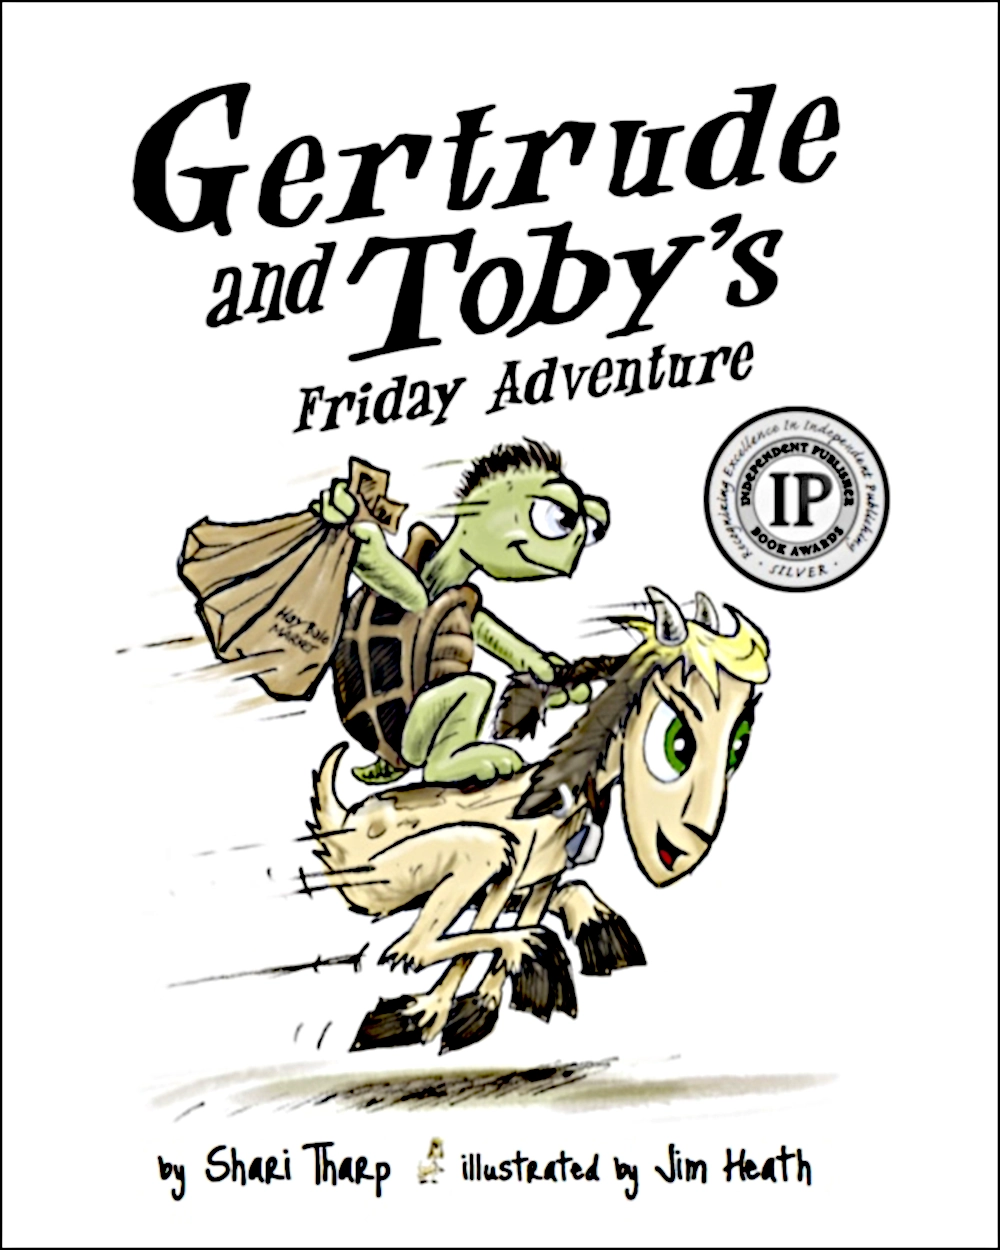 Cover image of Gertrude and Toby's Friday Adventure, the first book in the three-book Gertrude and Toby Adventure Series.